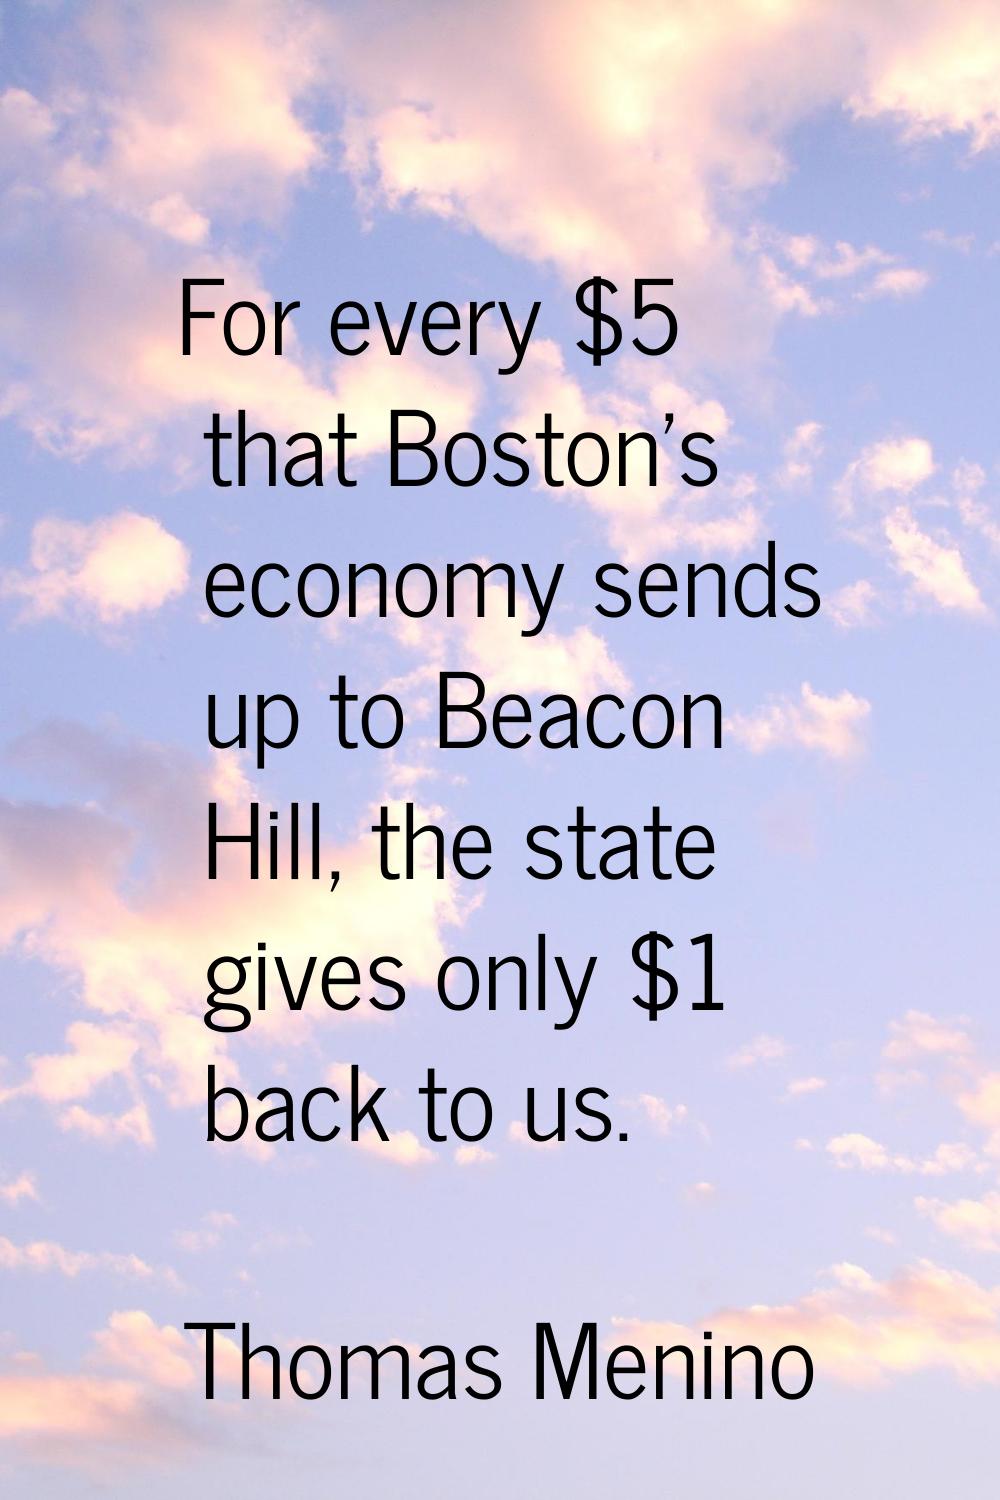 For every $5 that Boston's economy sends up to Beacon Hill, the state gives only $1 back to us.